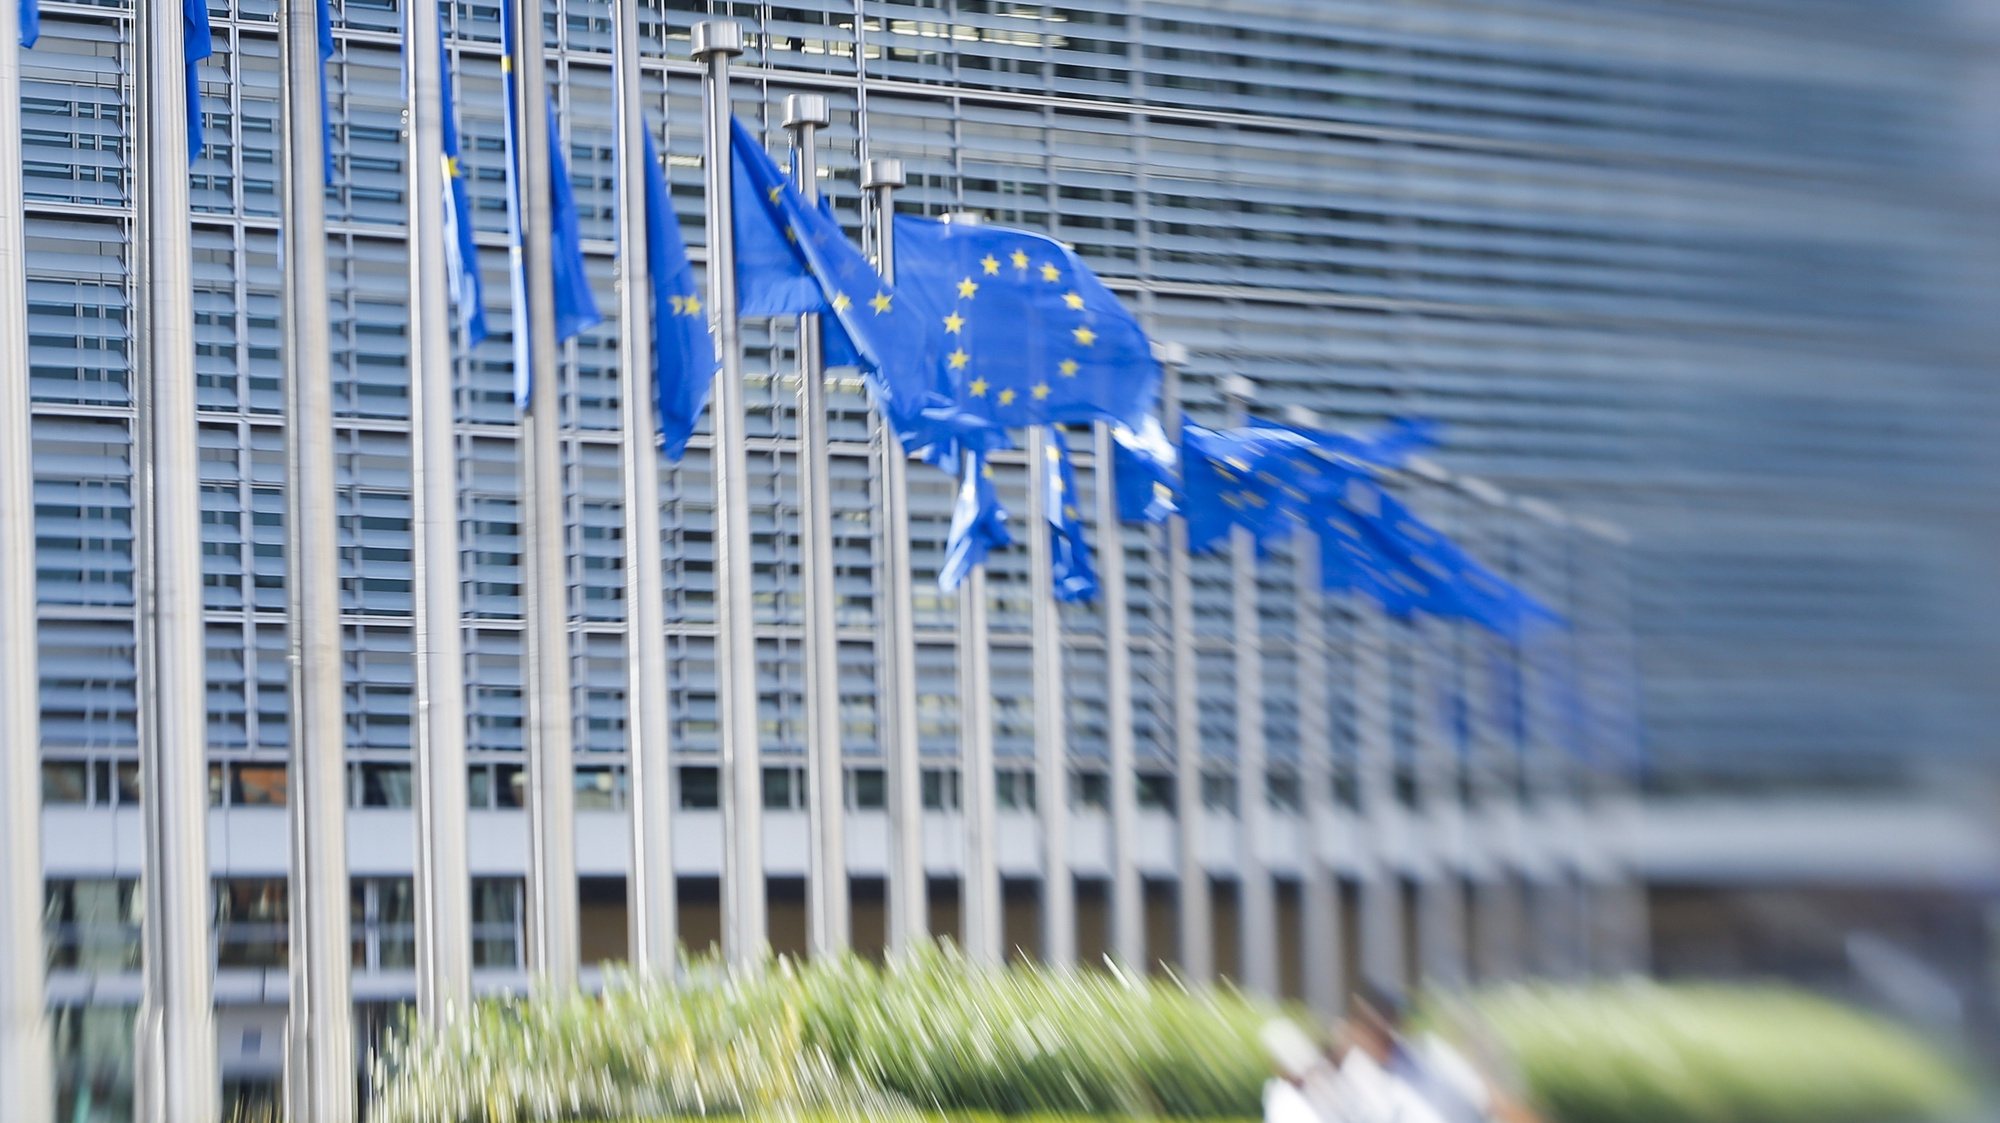 epa07239705 (FILE) - European flags in front of European Commission headquarters in Brussels, Belgium, 26 June 2018 (reissued 19 December 2018). According to a report by the New York Times, hackers have allegedly intercepted communications of European Union diplomatic staff for several years.  EPA/OLIVIER HOSLET